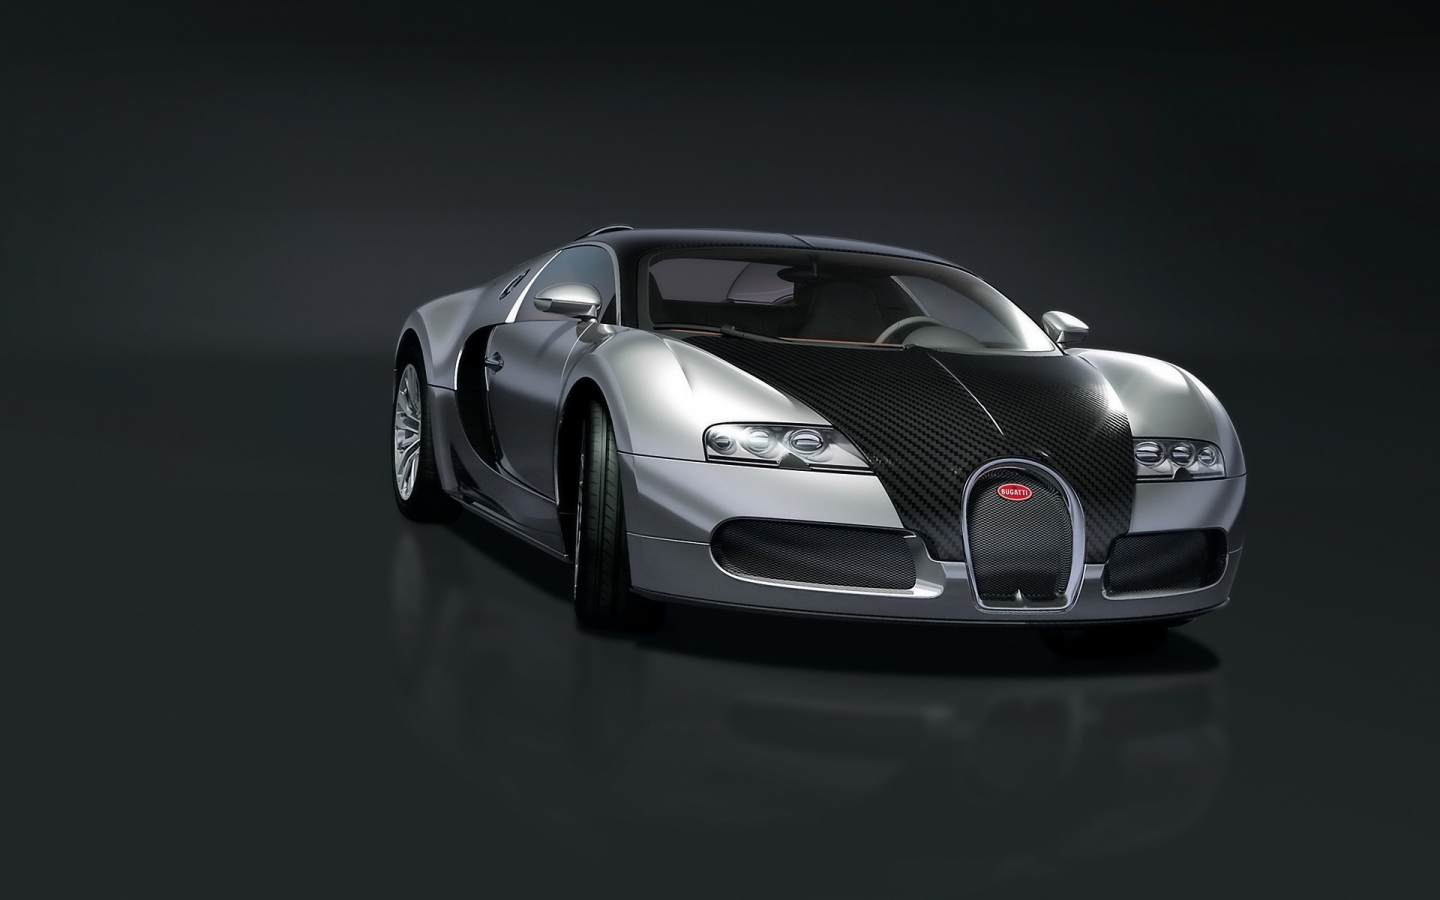 Bugatti EB 16.4 Veyron Pur Sang 2008 - Front Angle for 1440 x 900 widescreen resolution